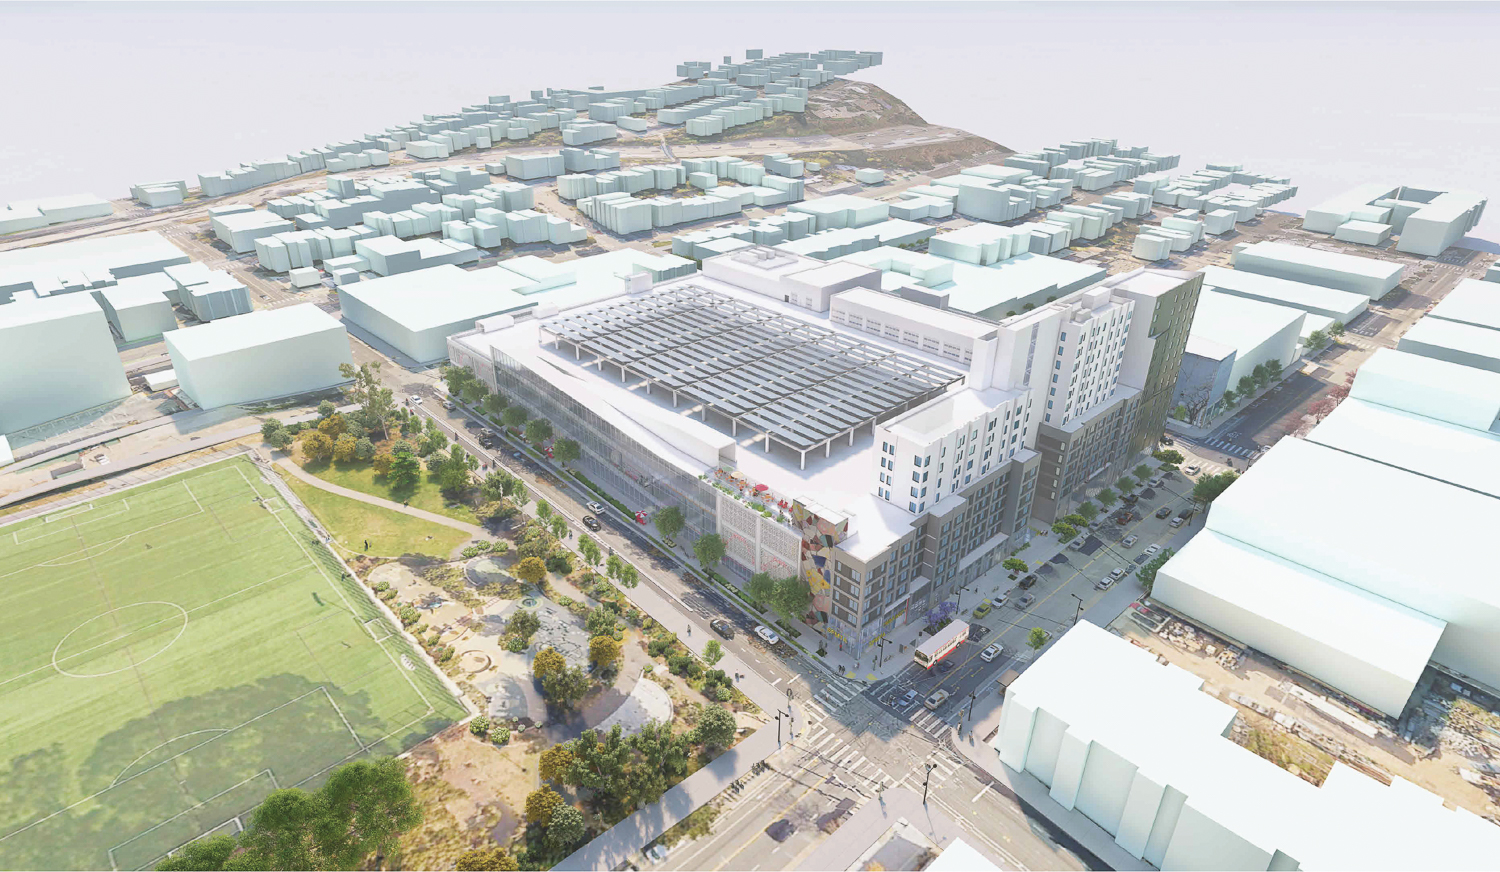 SFMTA Potrero Yard Redevelopment Refined Project Variant aerial view, rendering by Arcadis